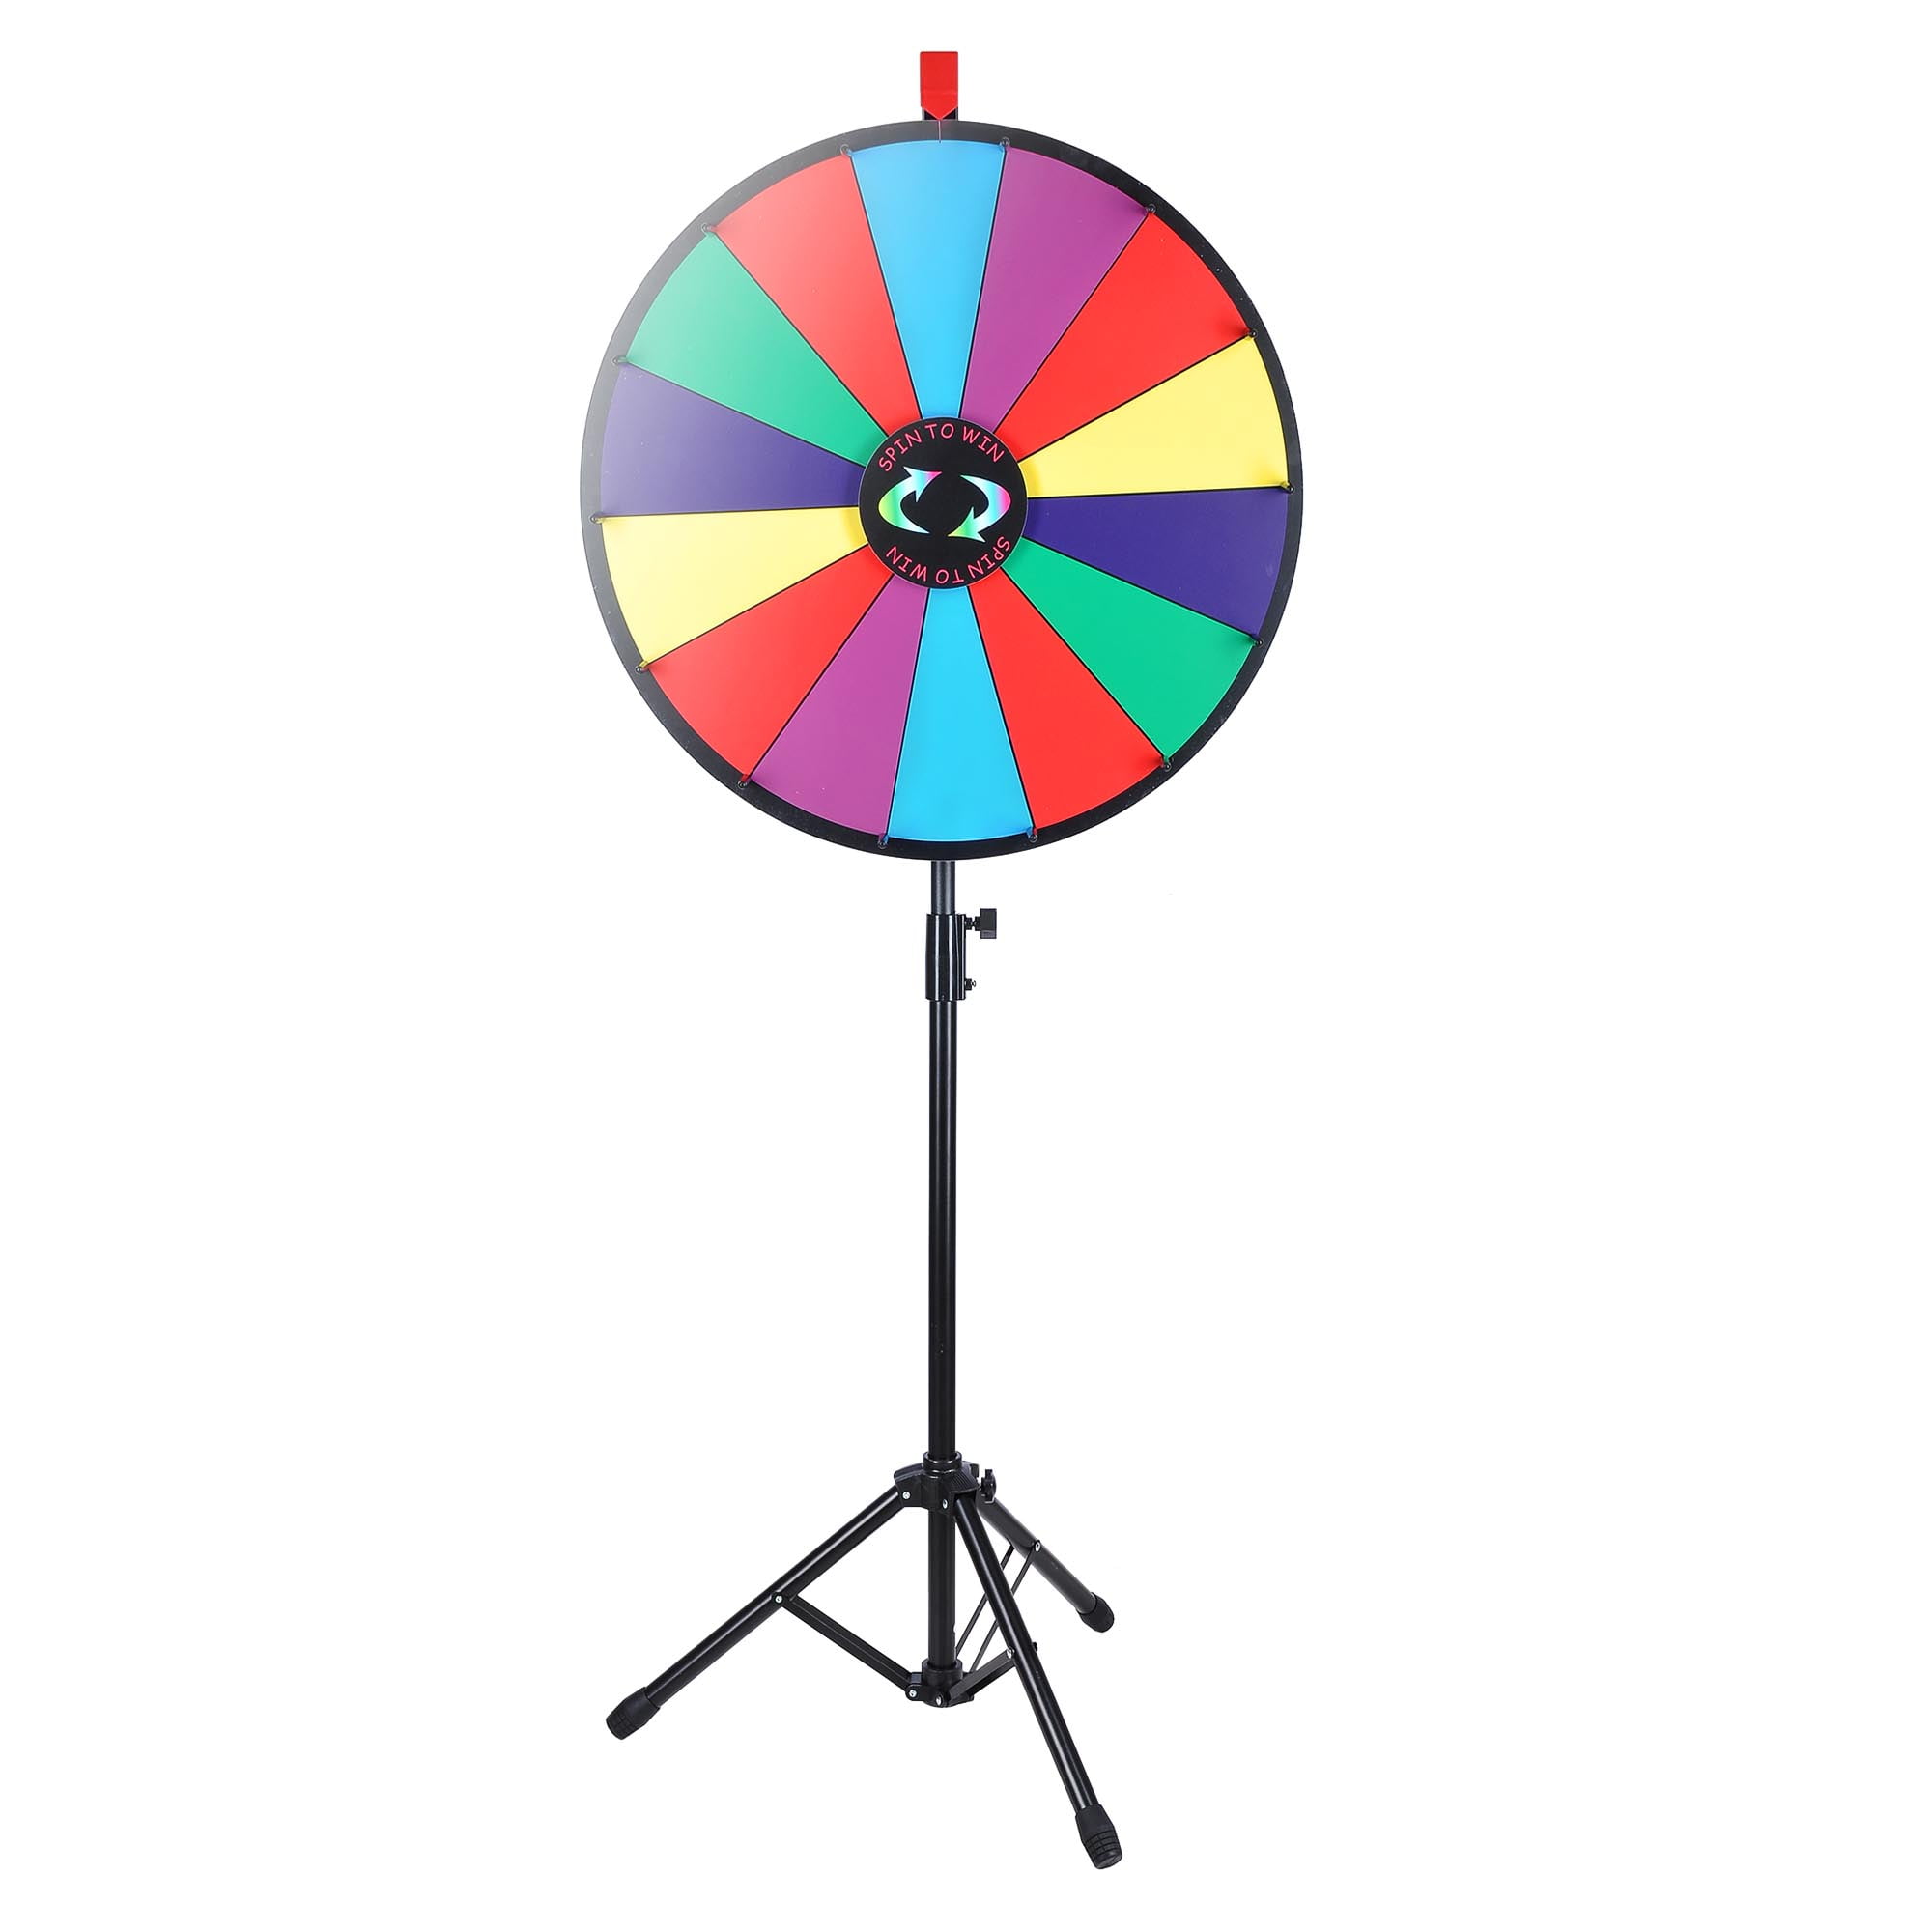 WUPYI 24 Inch Color Spinning Prize Wheel with Folding Tripod Floor Stand for Carnival Fortune Spinning Game,12 Slots 